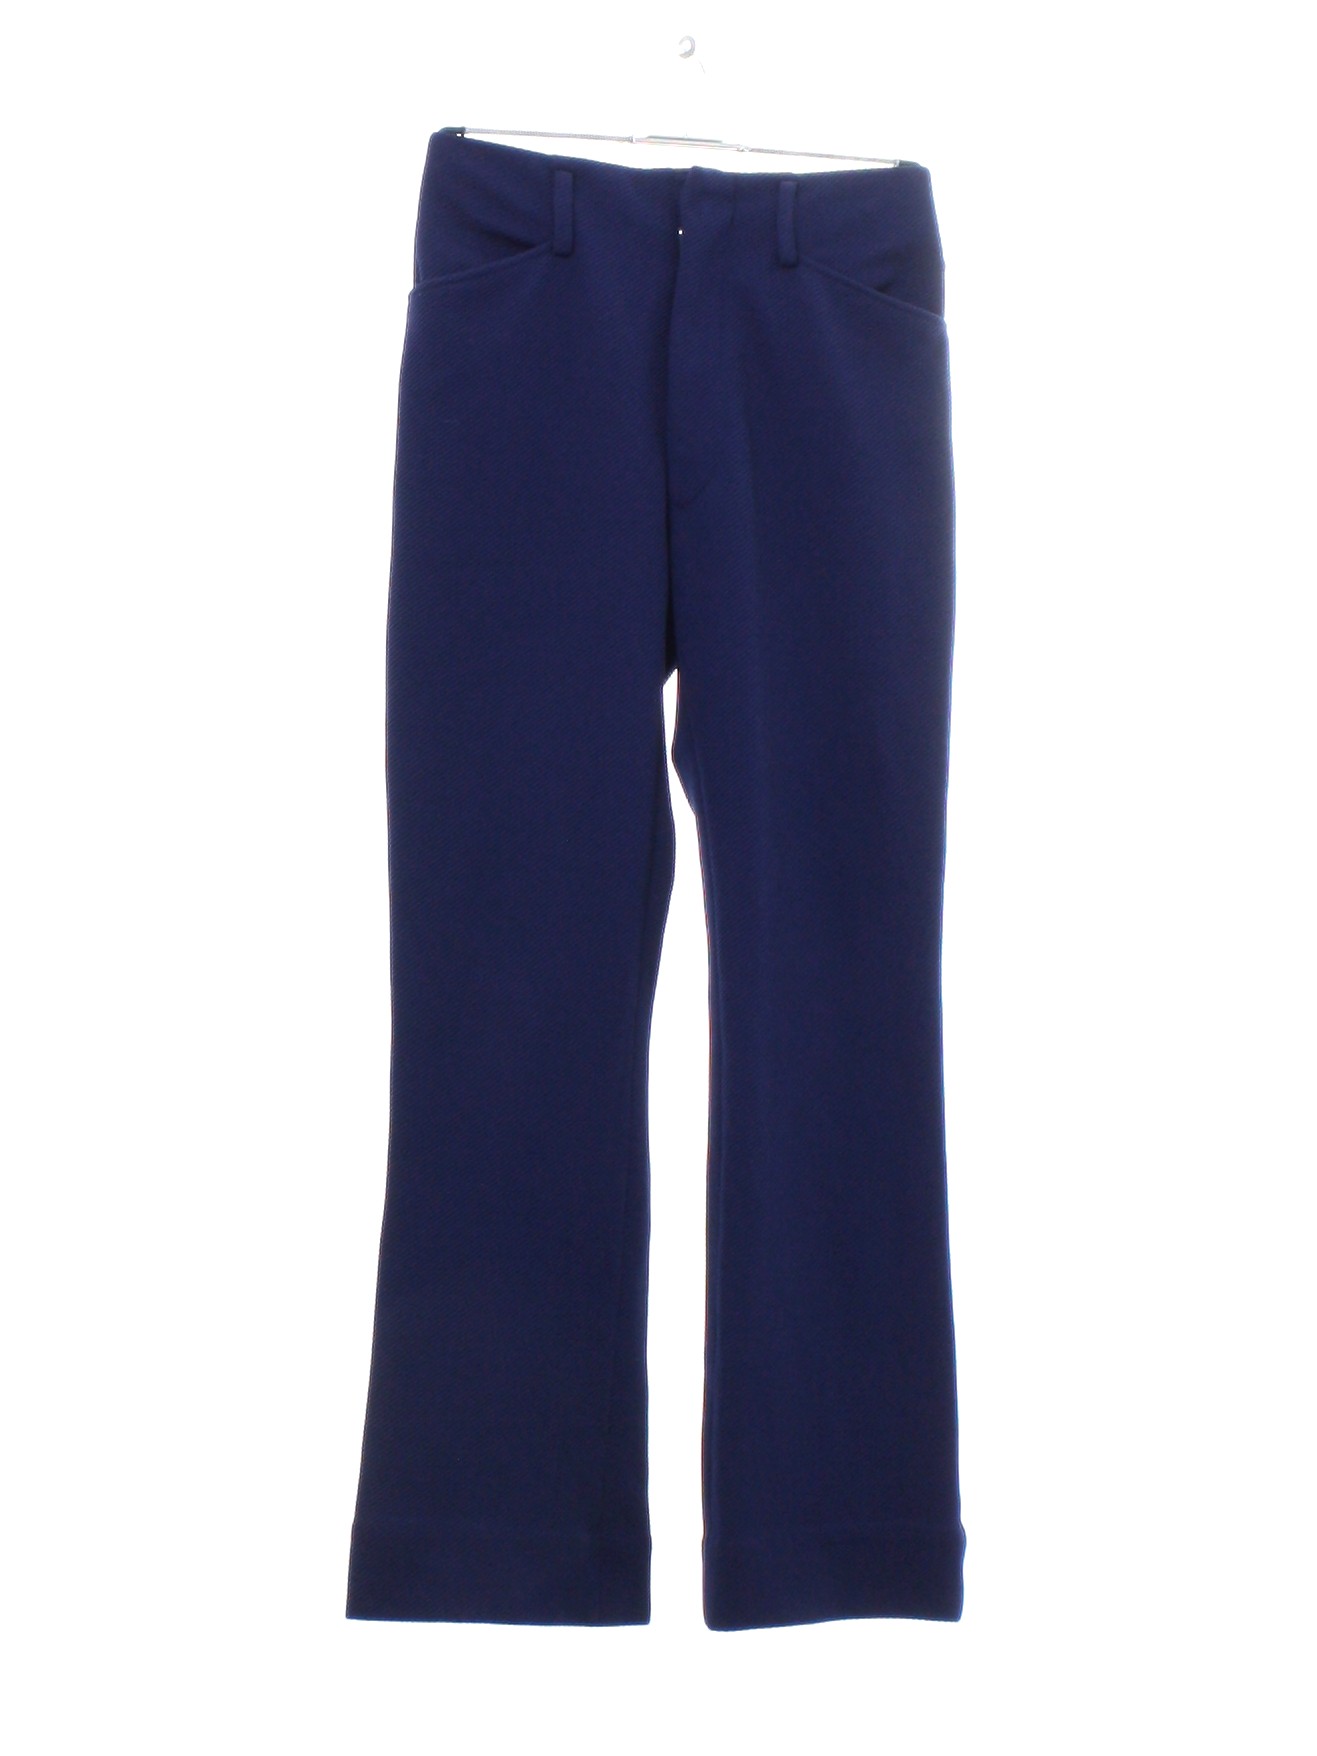 1960s Flared Pants / Flares: Late 60s -Exclusively Tailored by Modesto ...